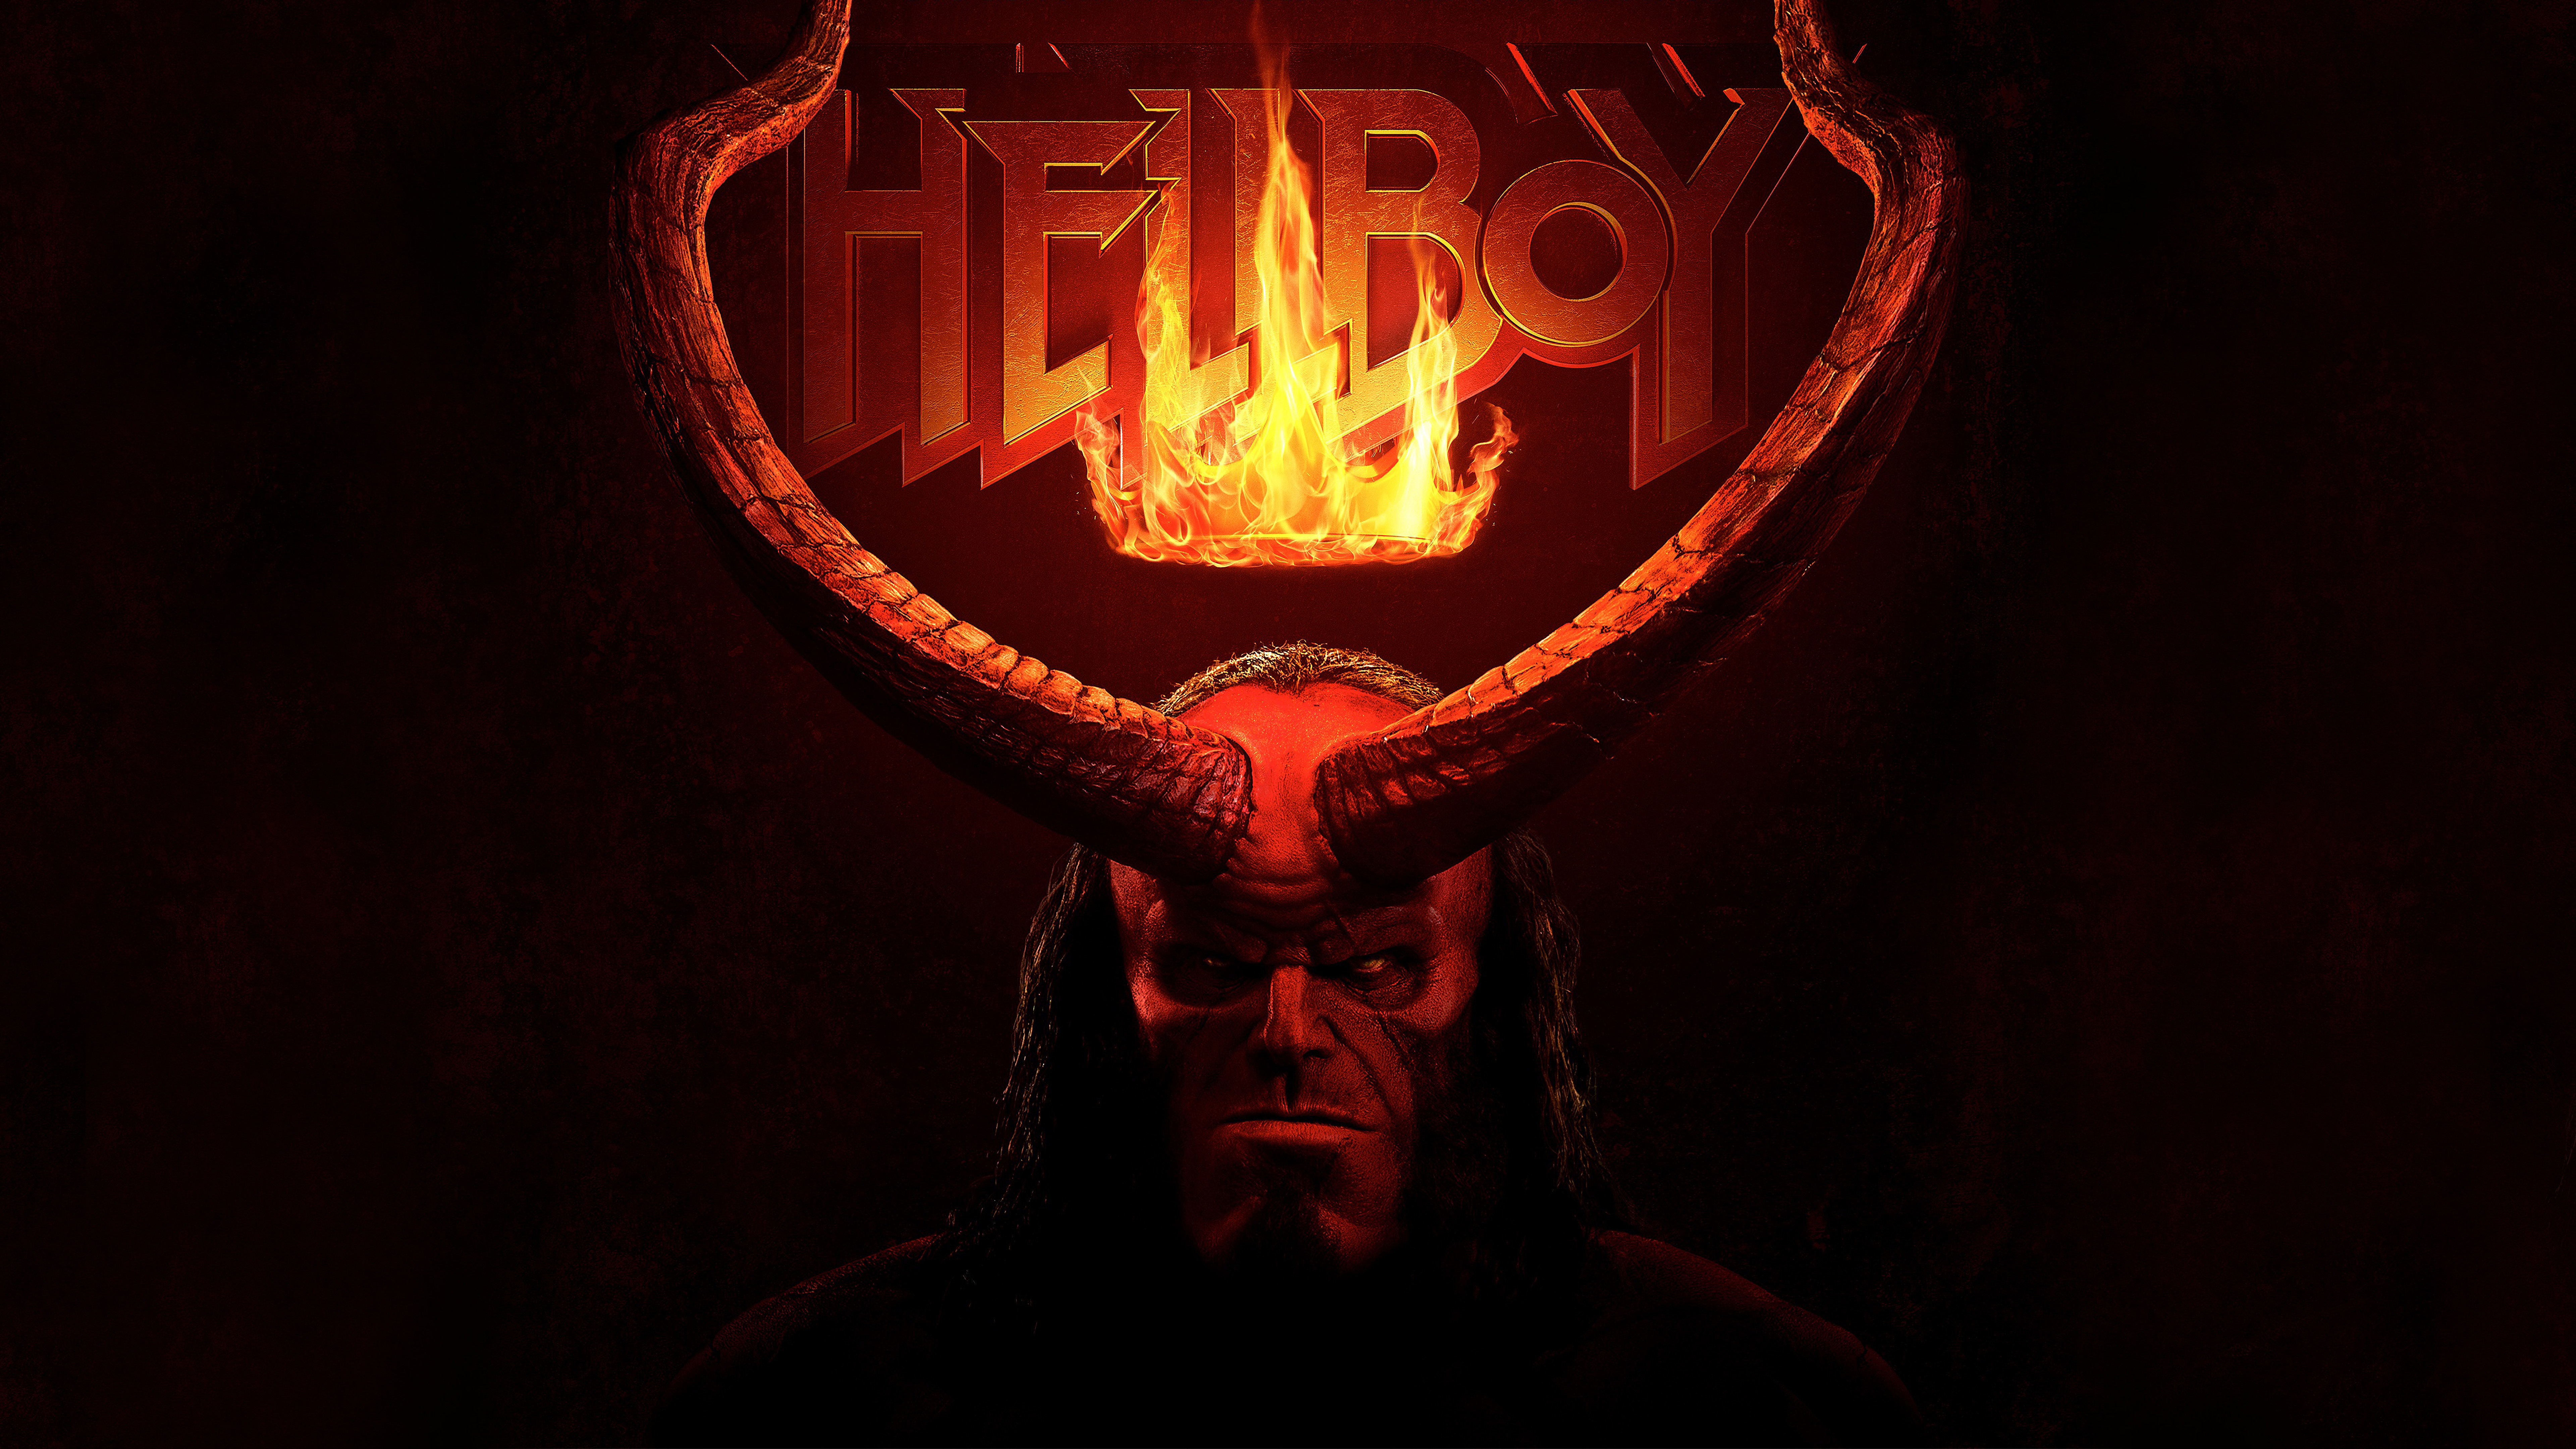 General 7680x4320 Hellboy movie characters movie poster dark horns fire crown face long hair frontal view